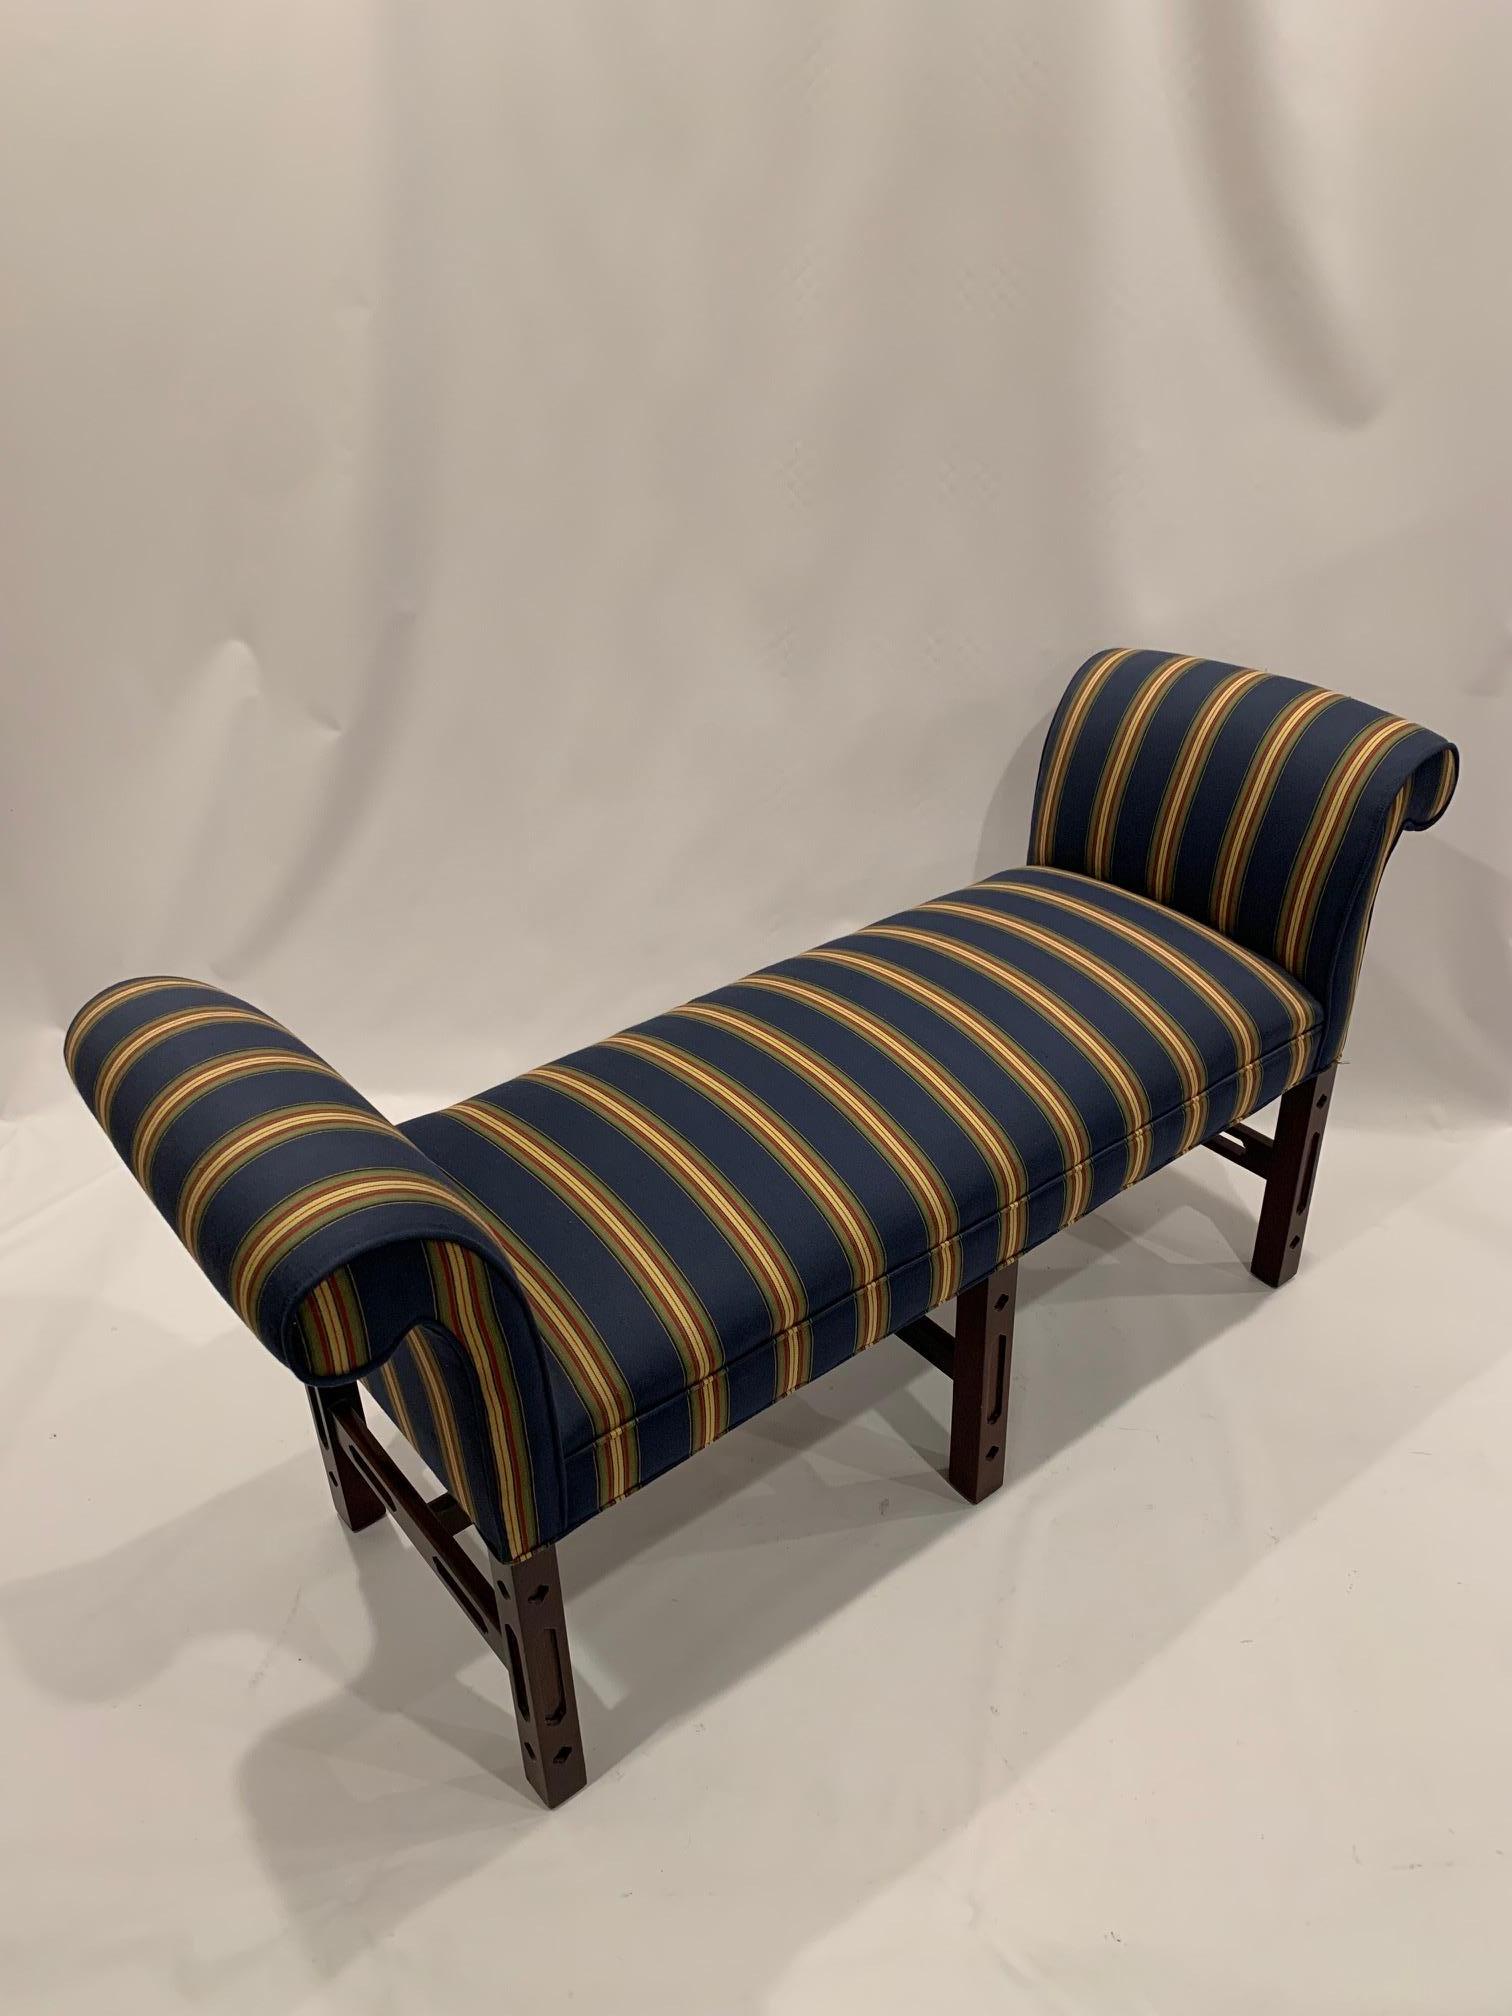 Classic mahogany Chippendale style bench having stylish striped upholstery.